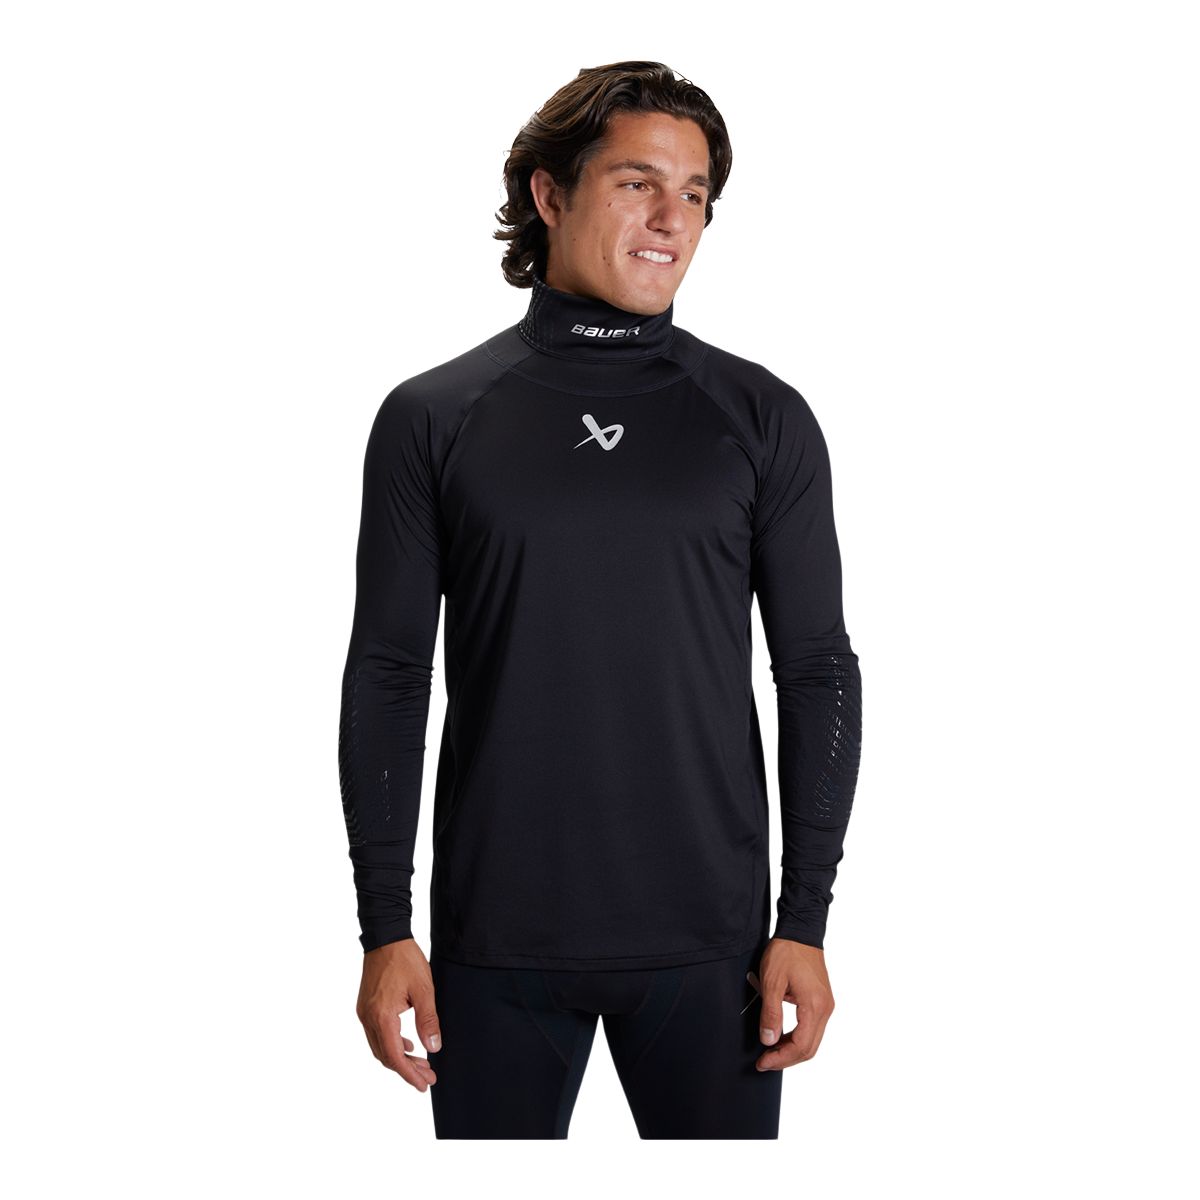 Bauer Long Sleeve Neckprotect